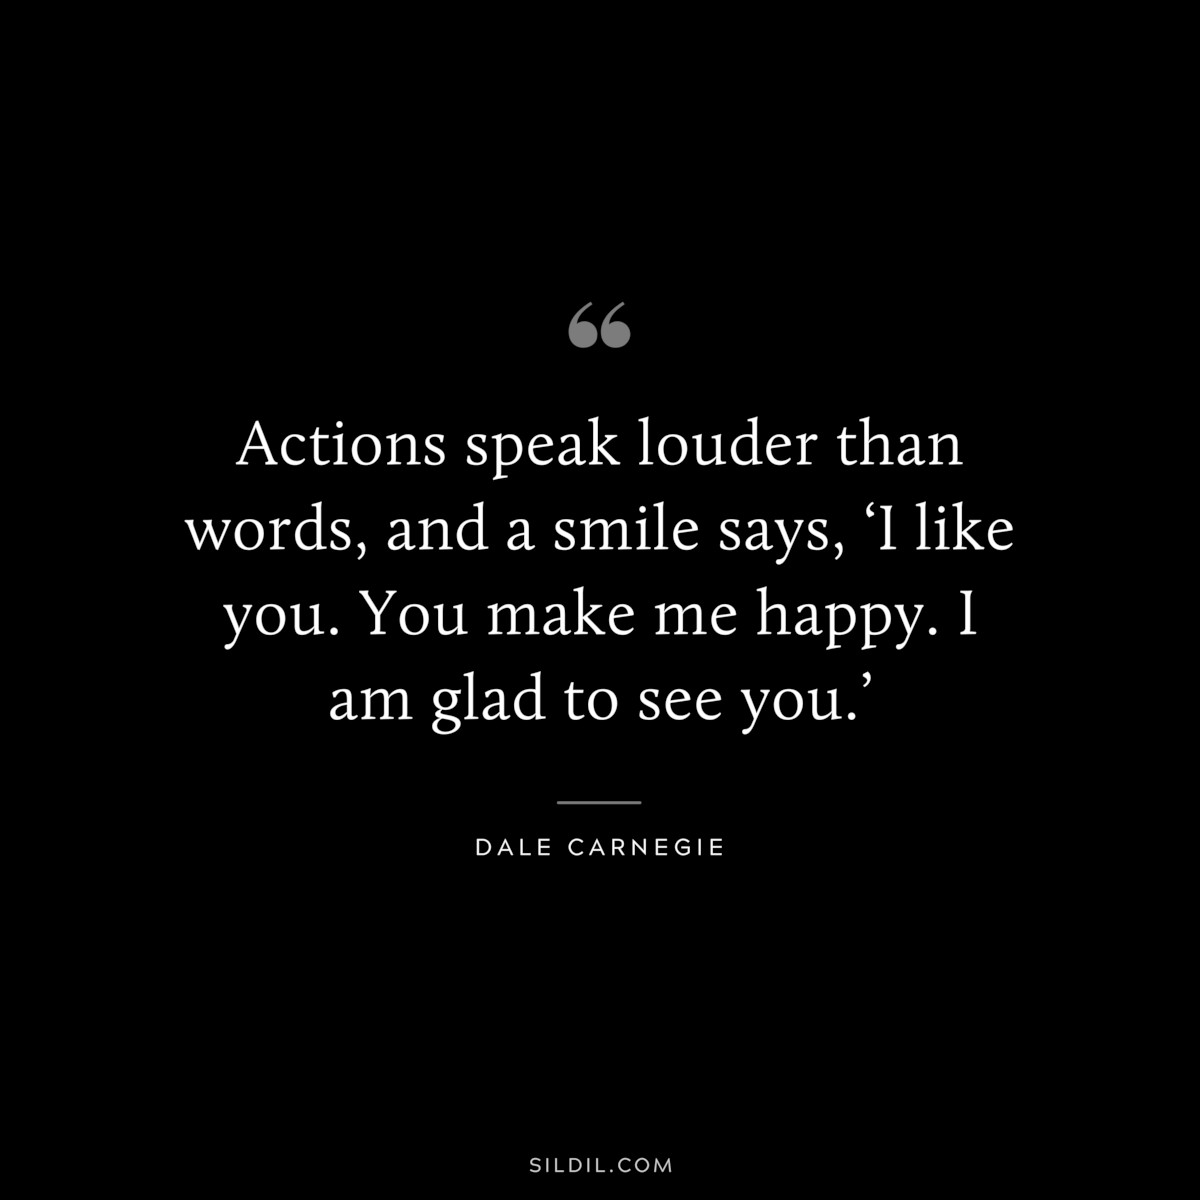 Actions speak louder than words, and a smile says, ‘I like you. You make me happy. I am glad to see you.’― Dale Carnegie